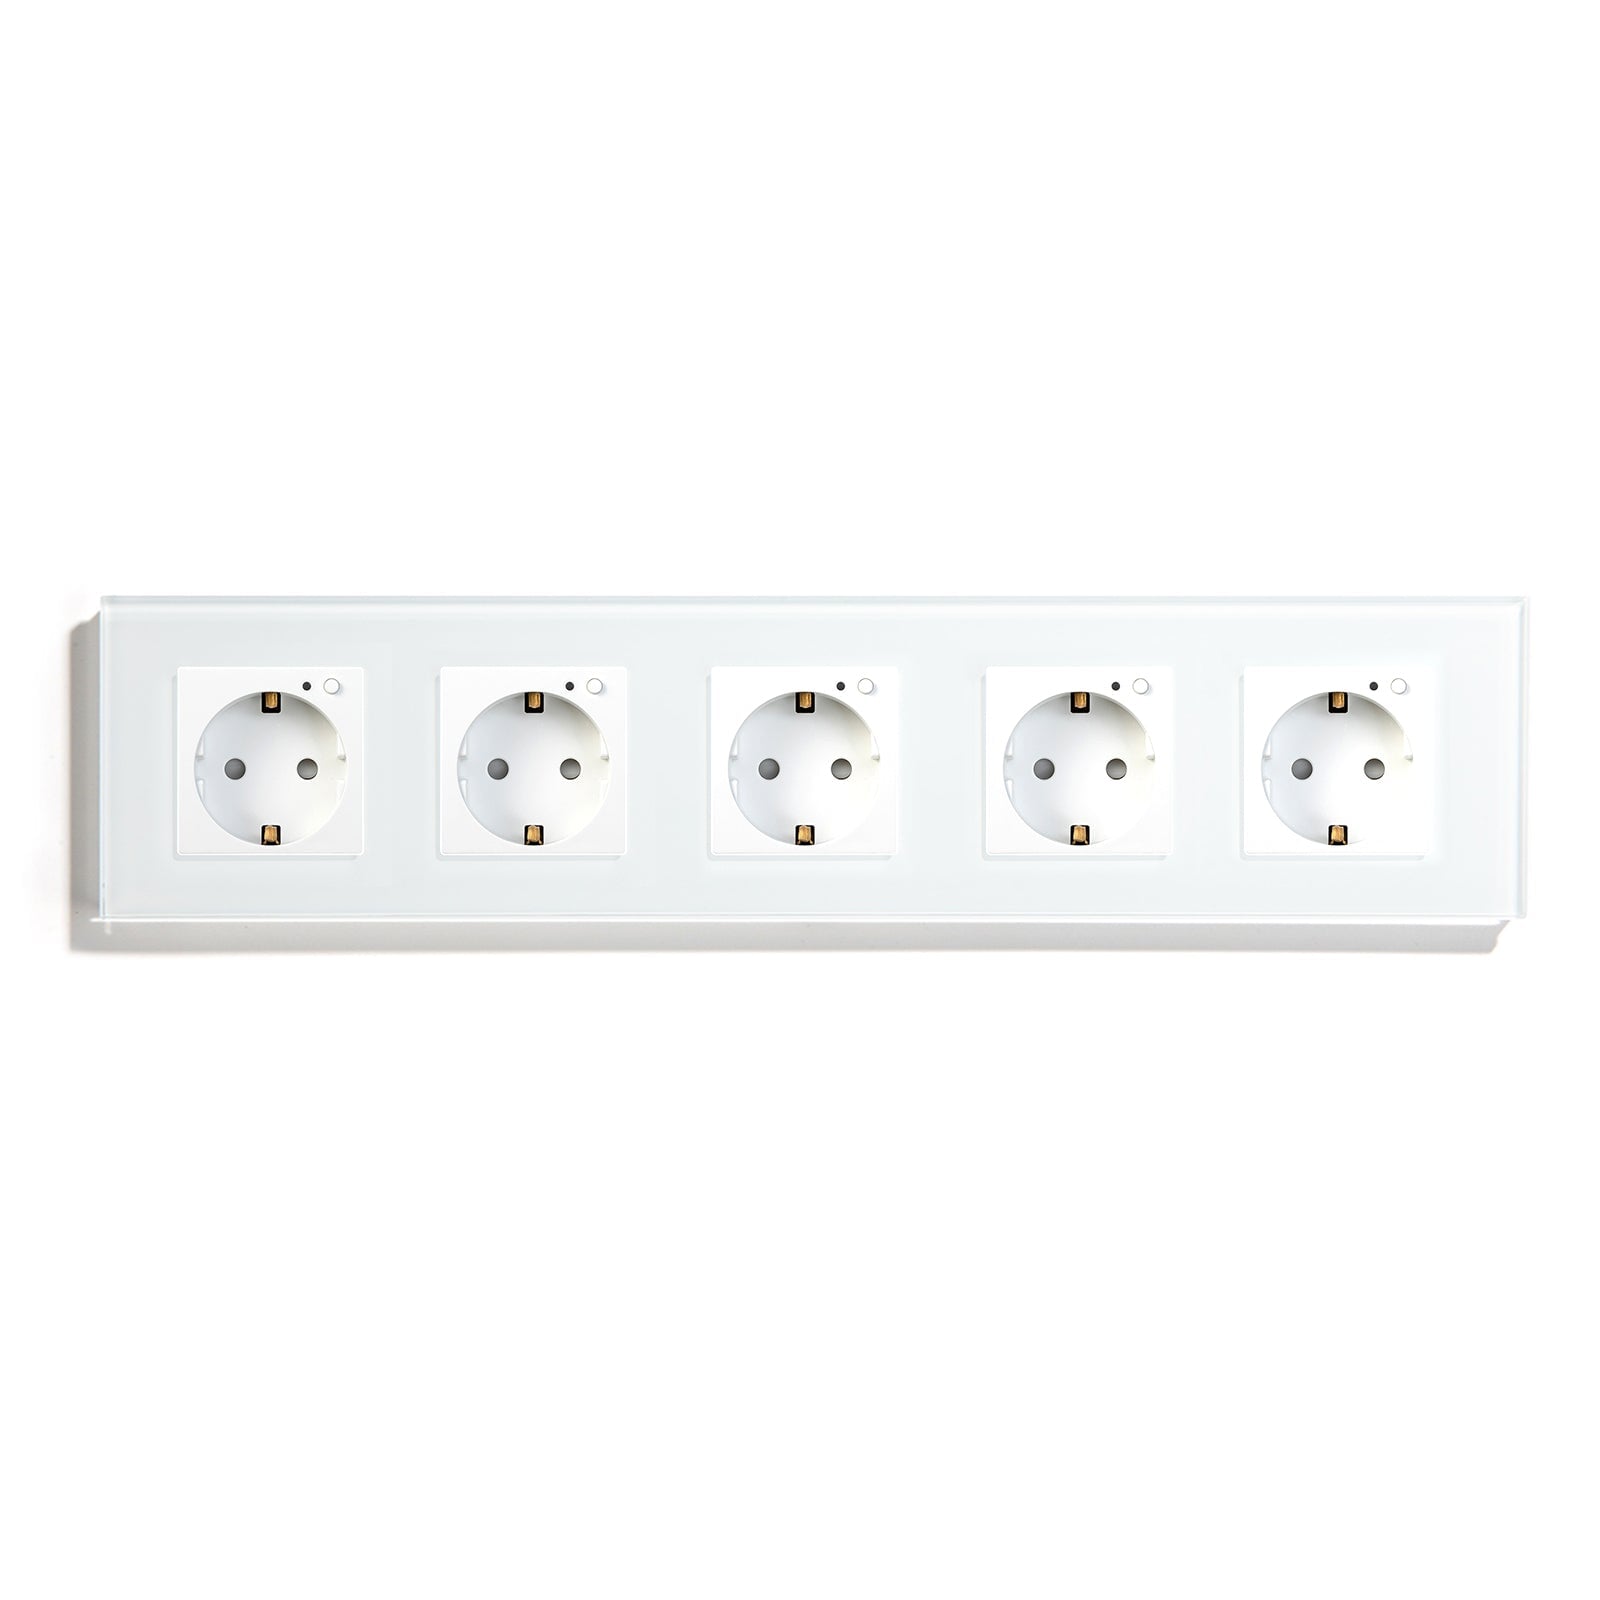 Bseed Wifi EU Standard Socket Wall Sockets With Energy Monitoring Power Outlets & Sockets Bseedswitch White Quintuple 